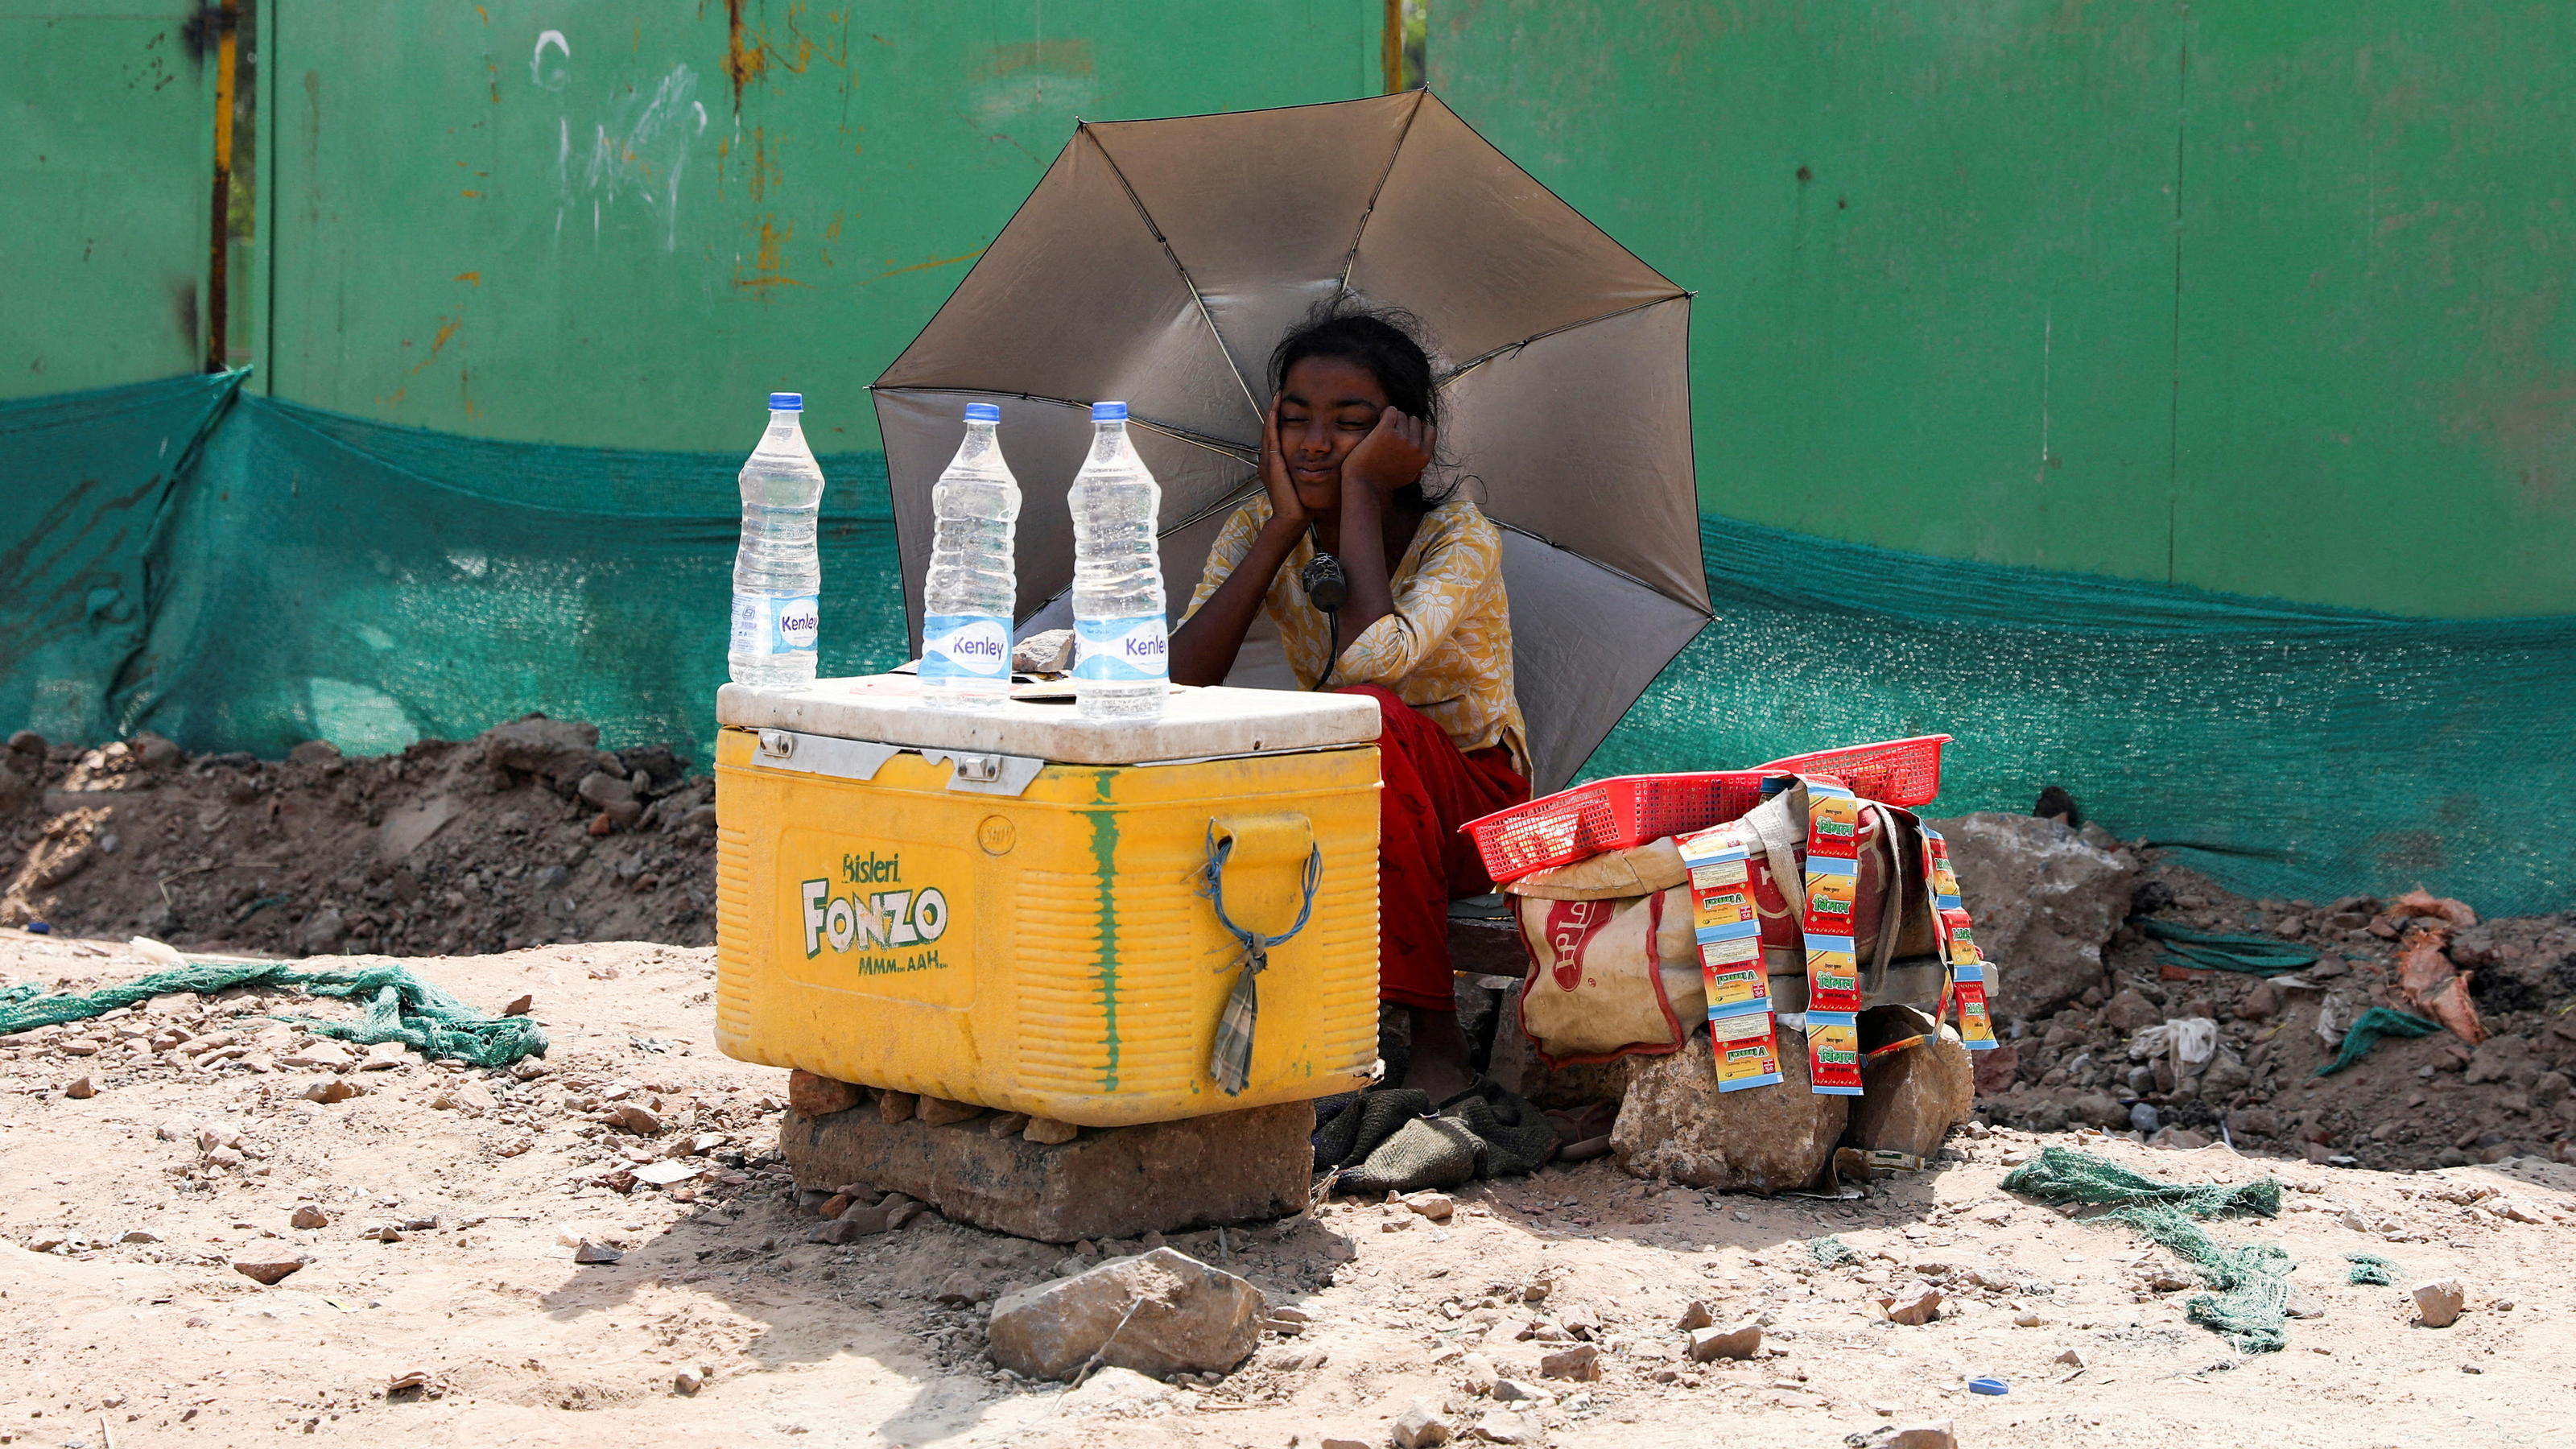 FILE PHOTO: A girl selling water uses an umbrella to protect herself from the sun as she waits for customers on a hot summer day, in New Delhi, India, April 27, 2022. REUTERS/Anushree Fadnavis/File Photo